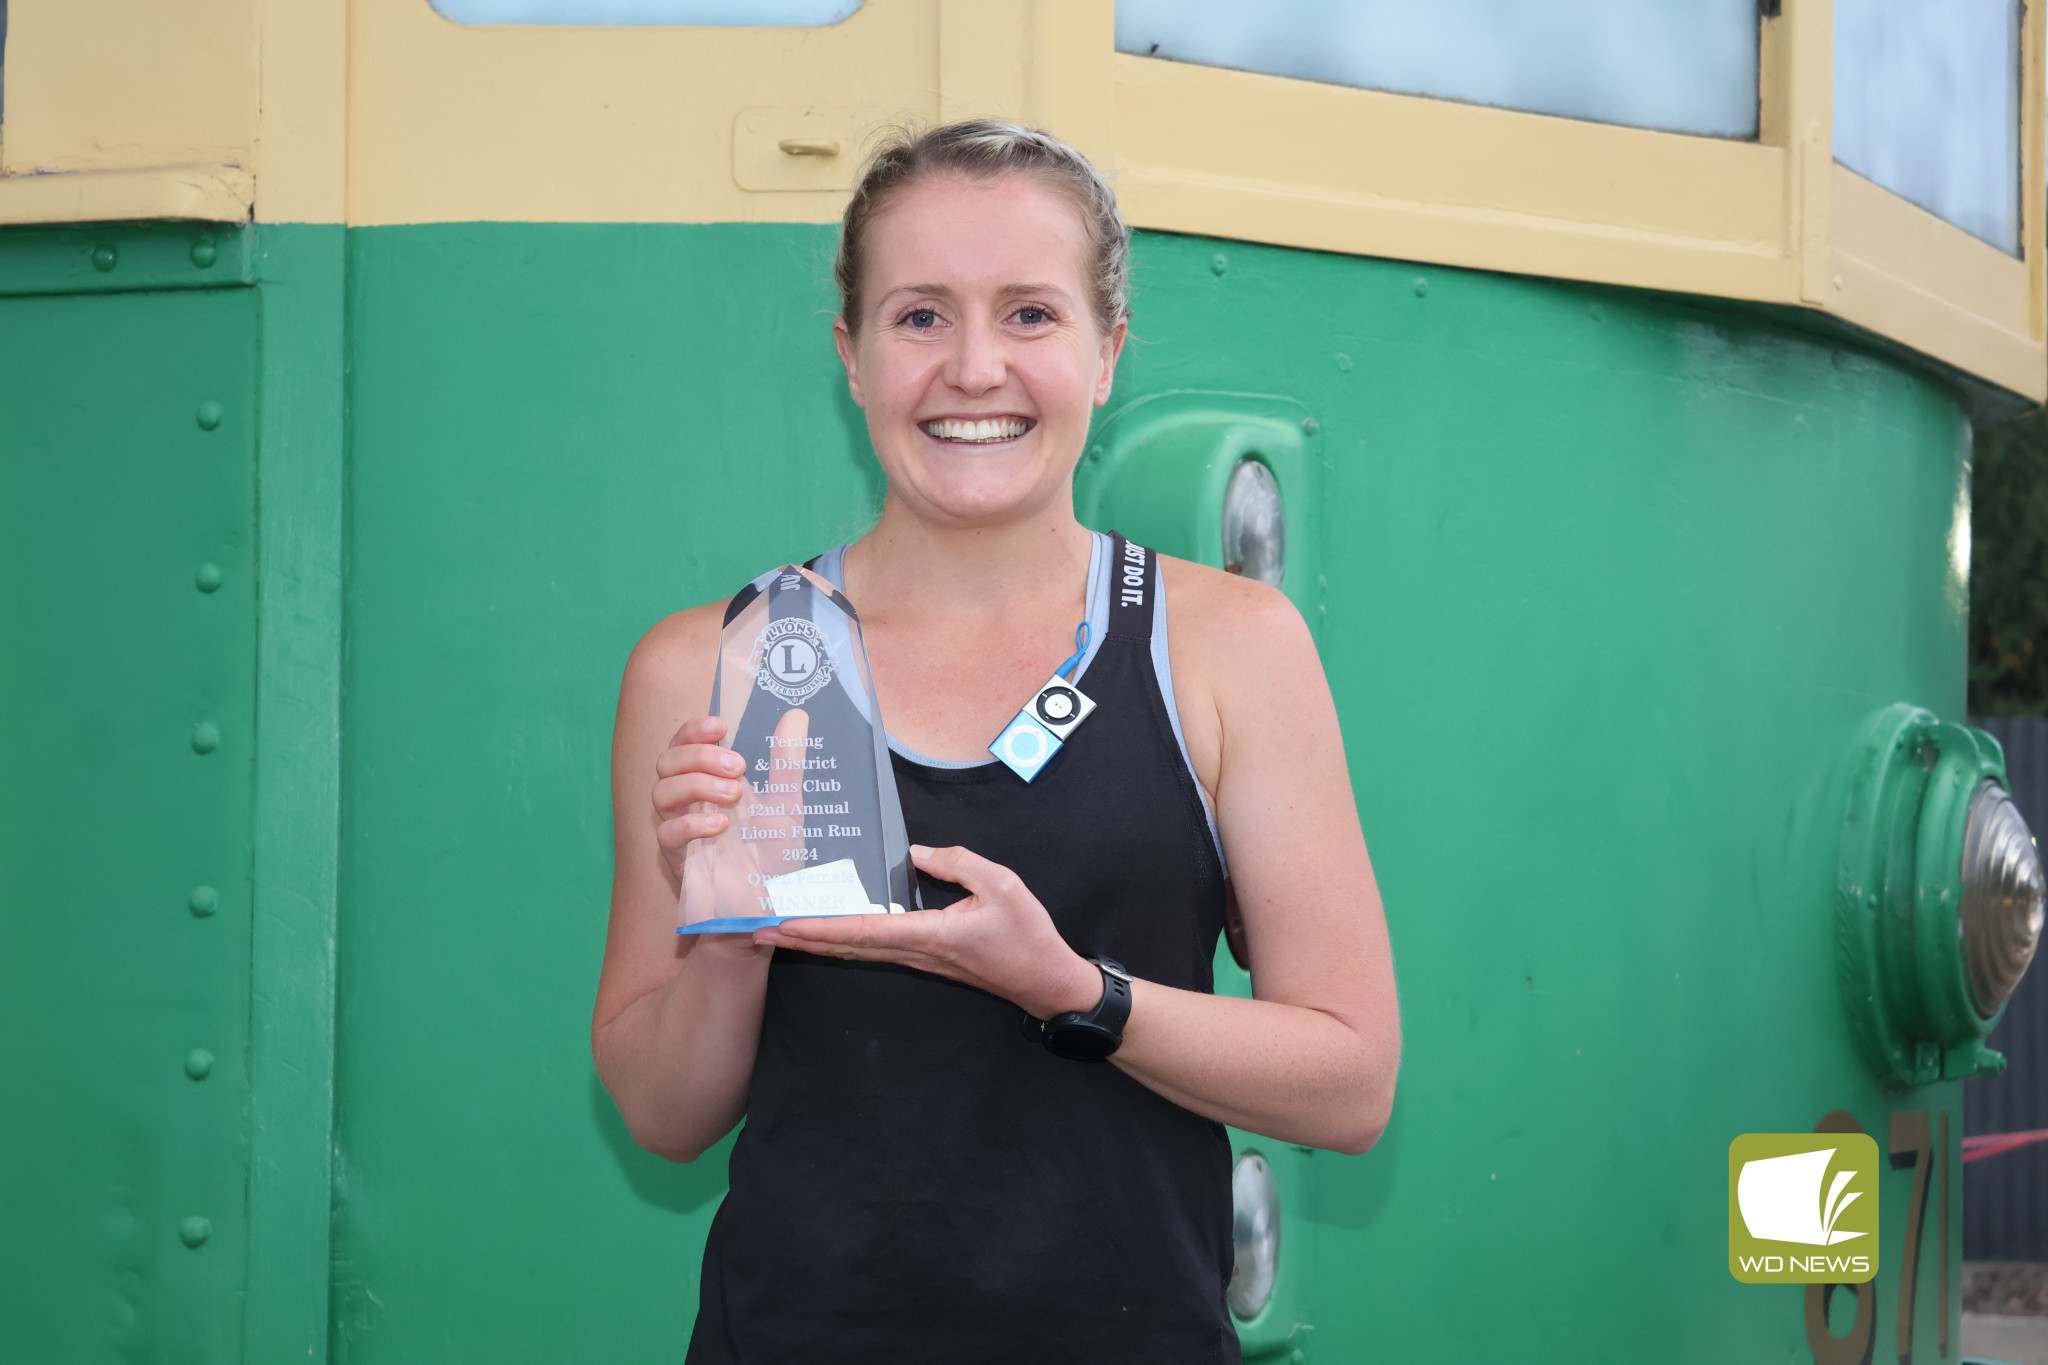 Camperdown’s Elle Price claimed her third fun run victory, and second in the last two years.